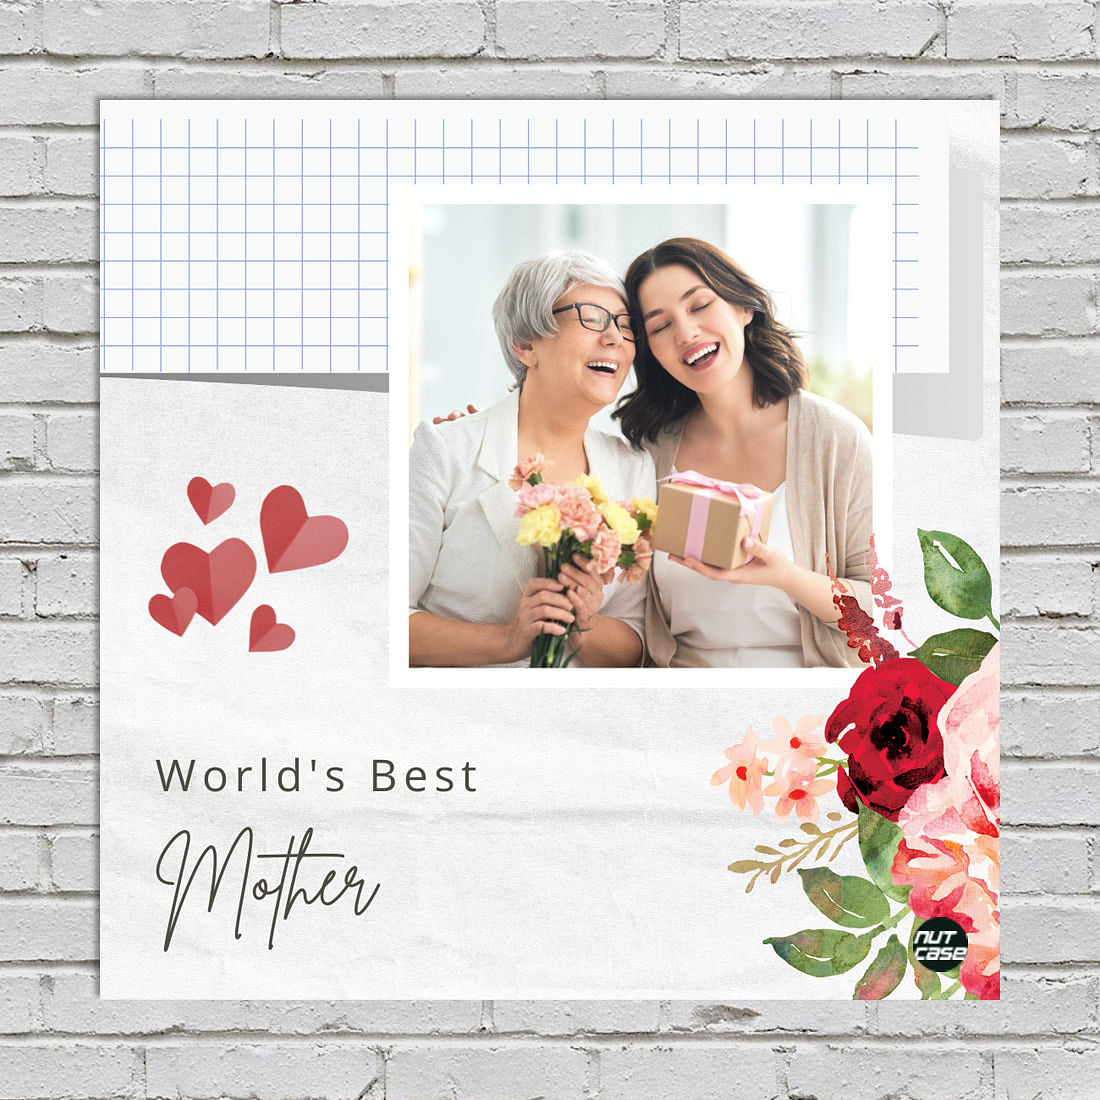 Handmade Mother's Day Gift Ideas - The Idea Room